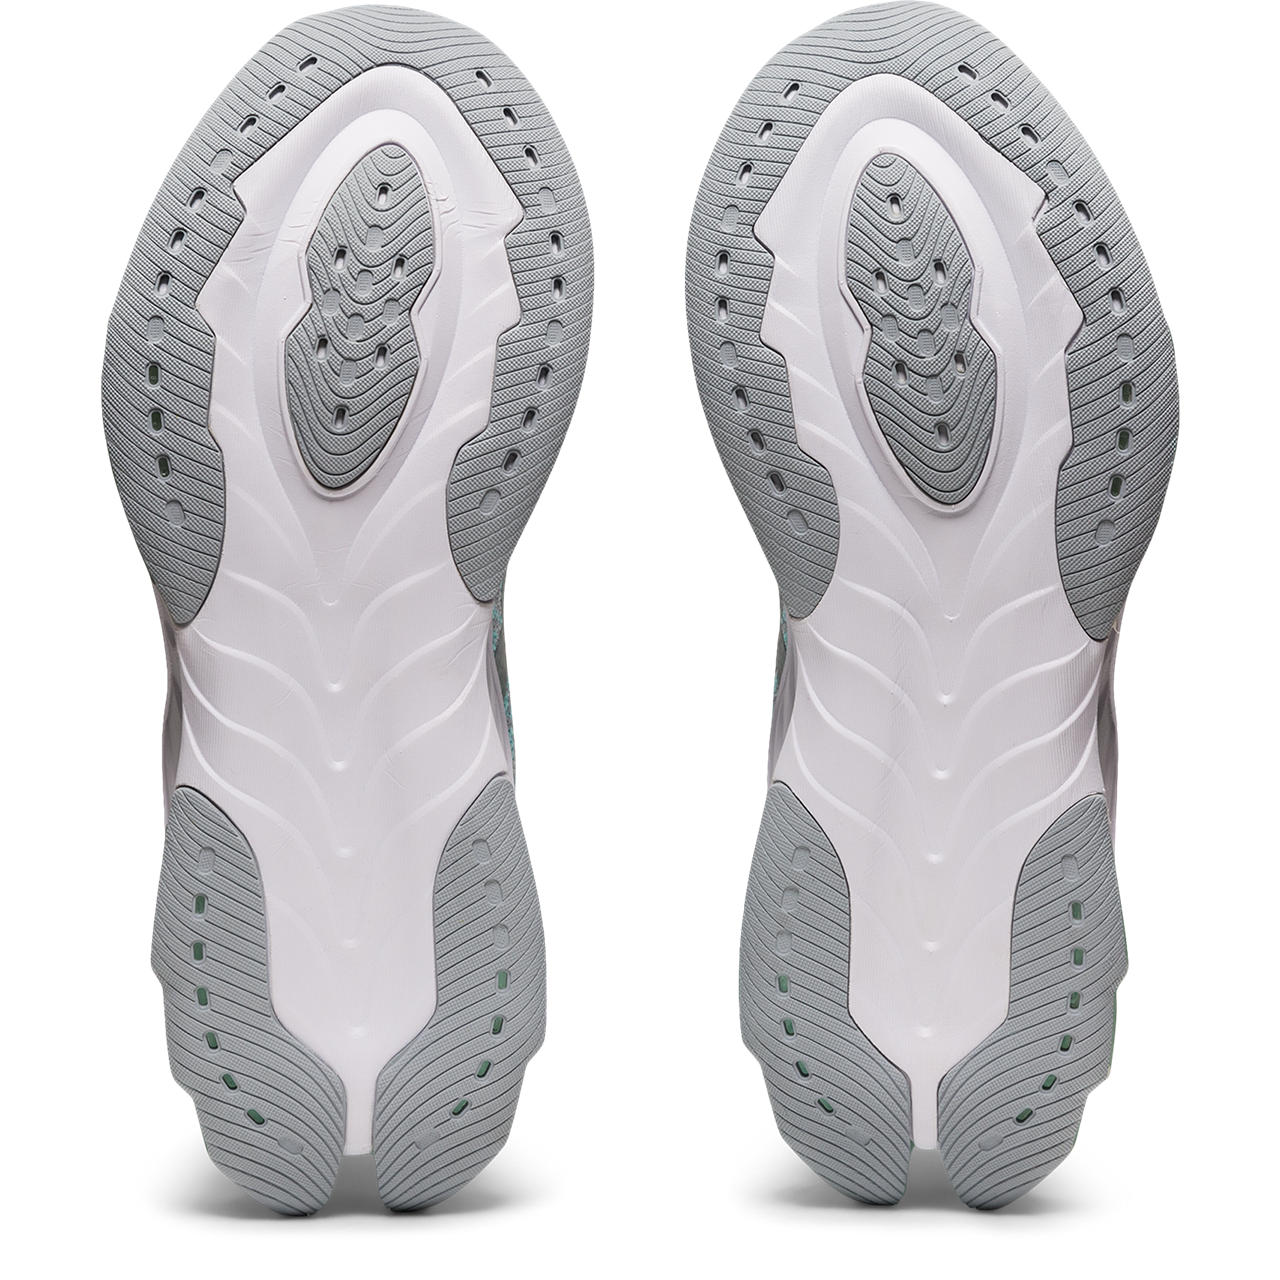 Bottom (outer sole) view of the Women's Kinsei Blast by ASIC in the color Glacier Grey/Piedmont Grey